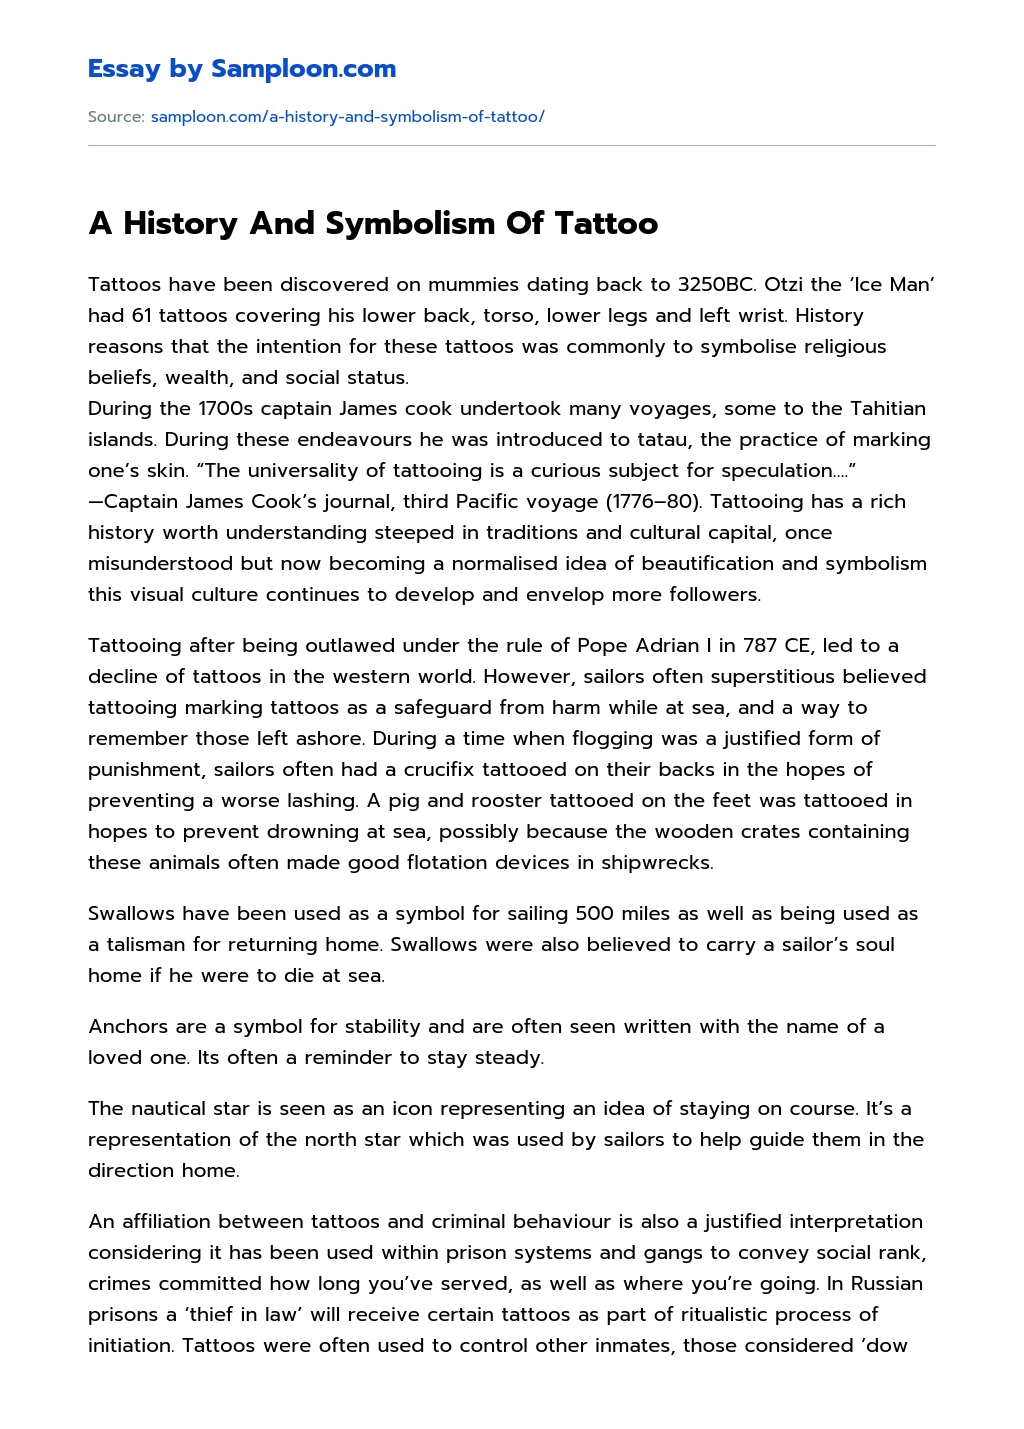 A History And Symbolism Of Tattoo essay